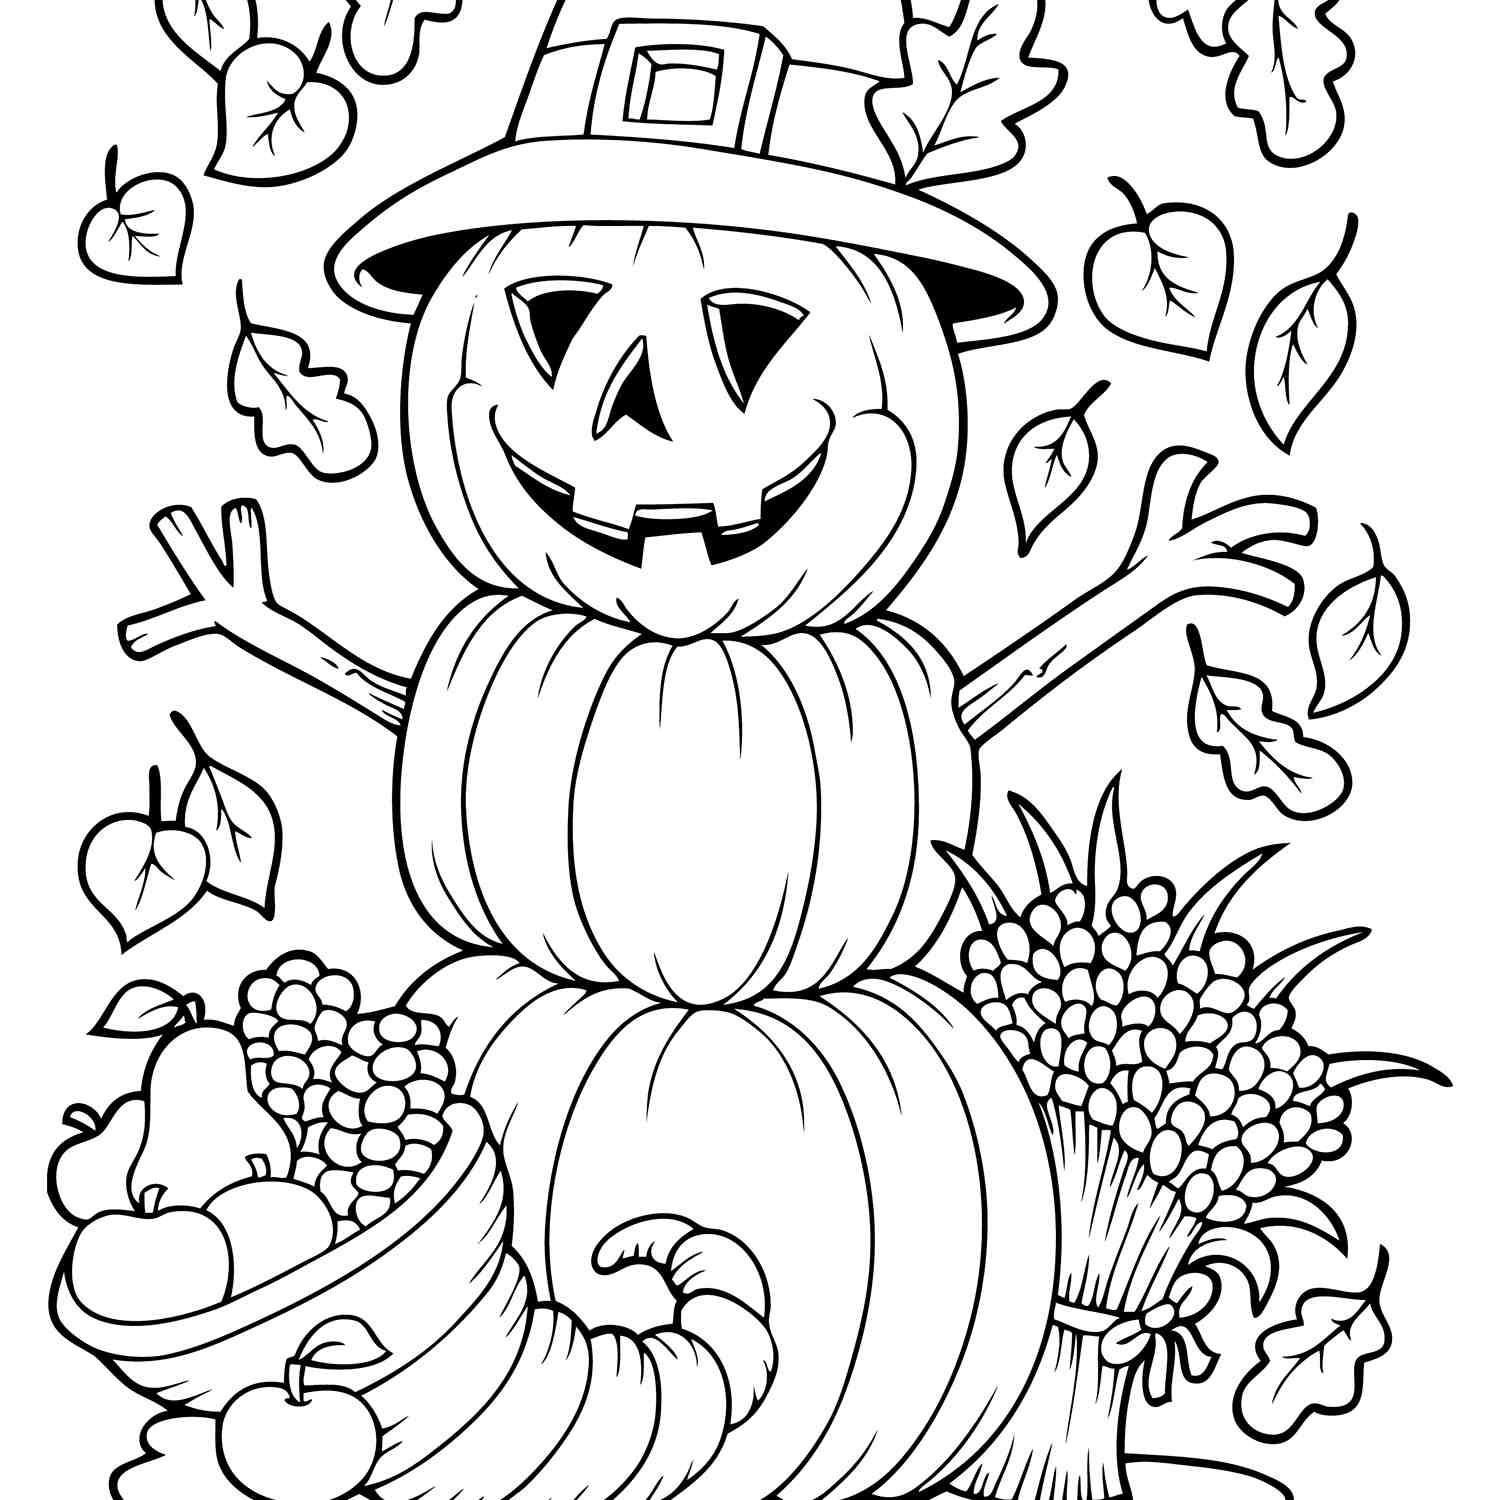 Printable Coloring Pages Fall
 Free Autumn and Fall Coloring Pages